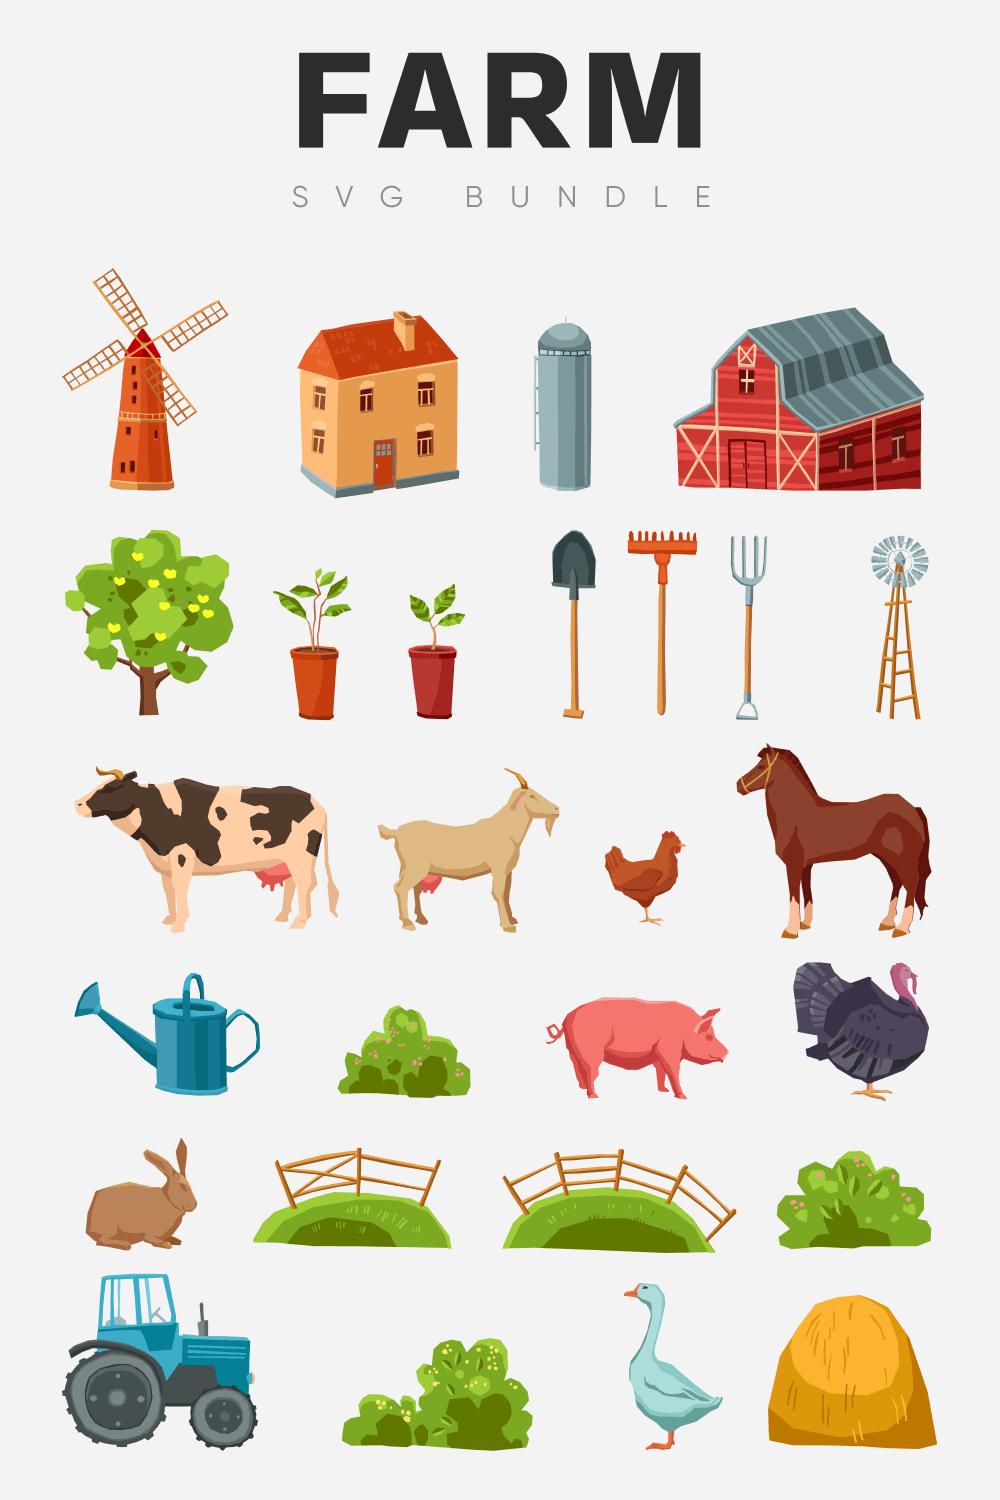 Crops, Domestic Animals and Tools.